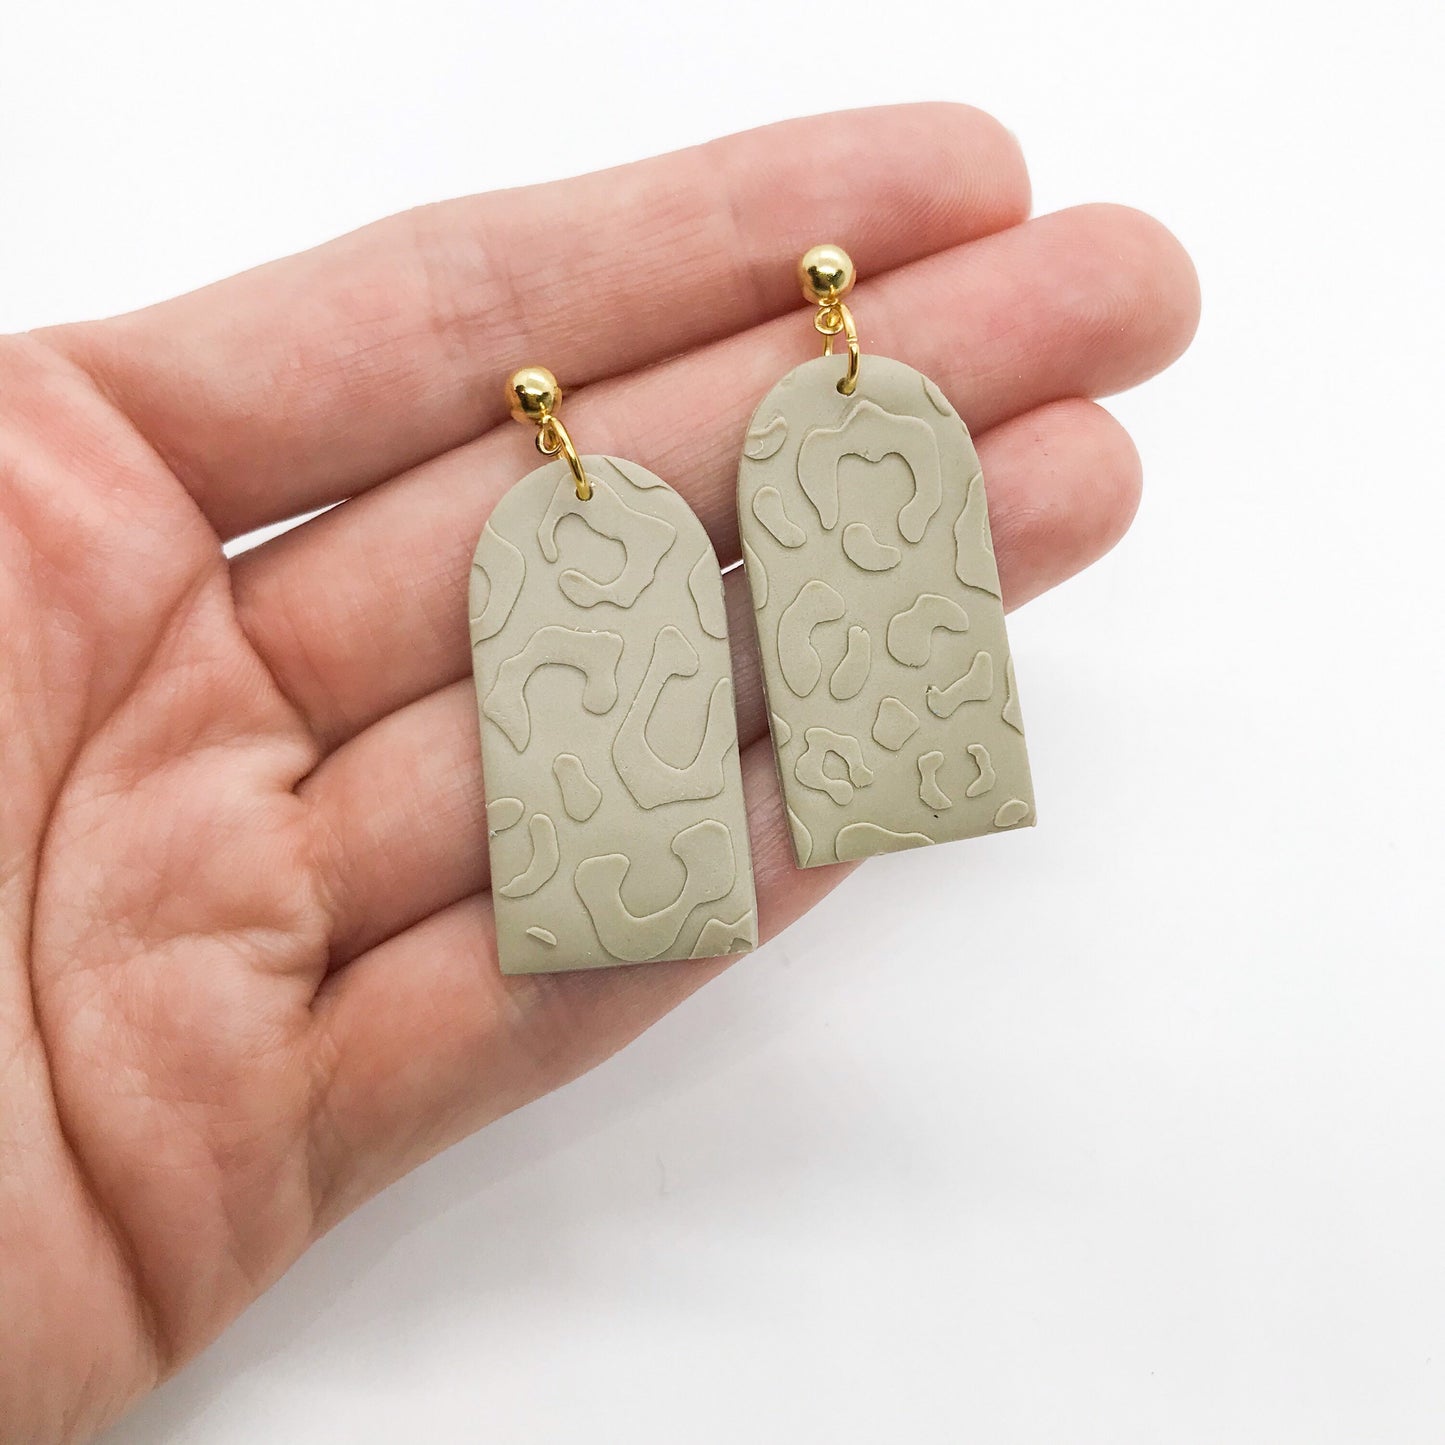 polymer clay earrings, fawn embossed leopard print, nickel free brass post, post box gift, best friend birthday gift, girlfriend gift,